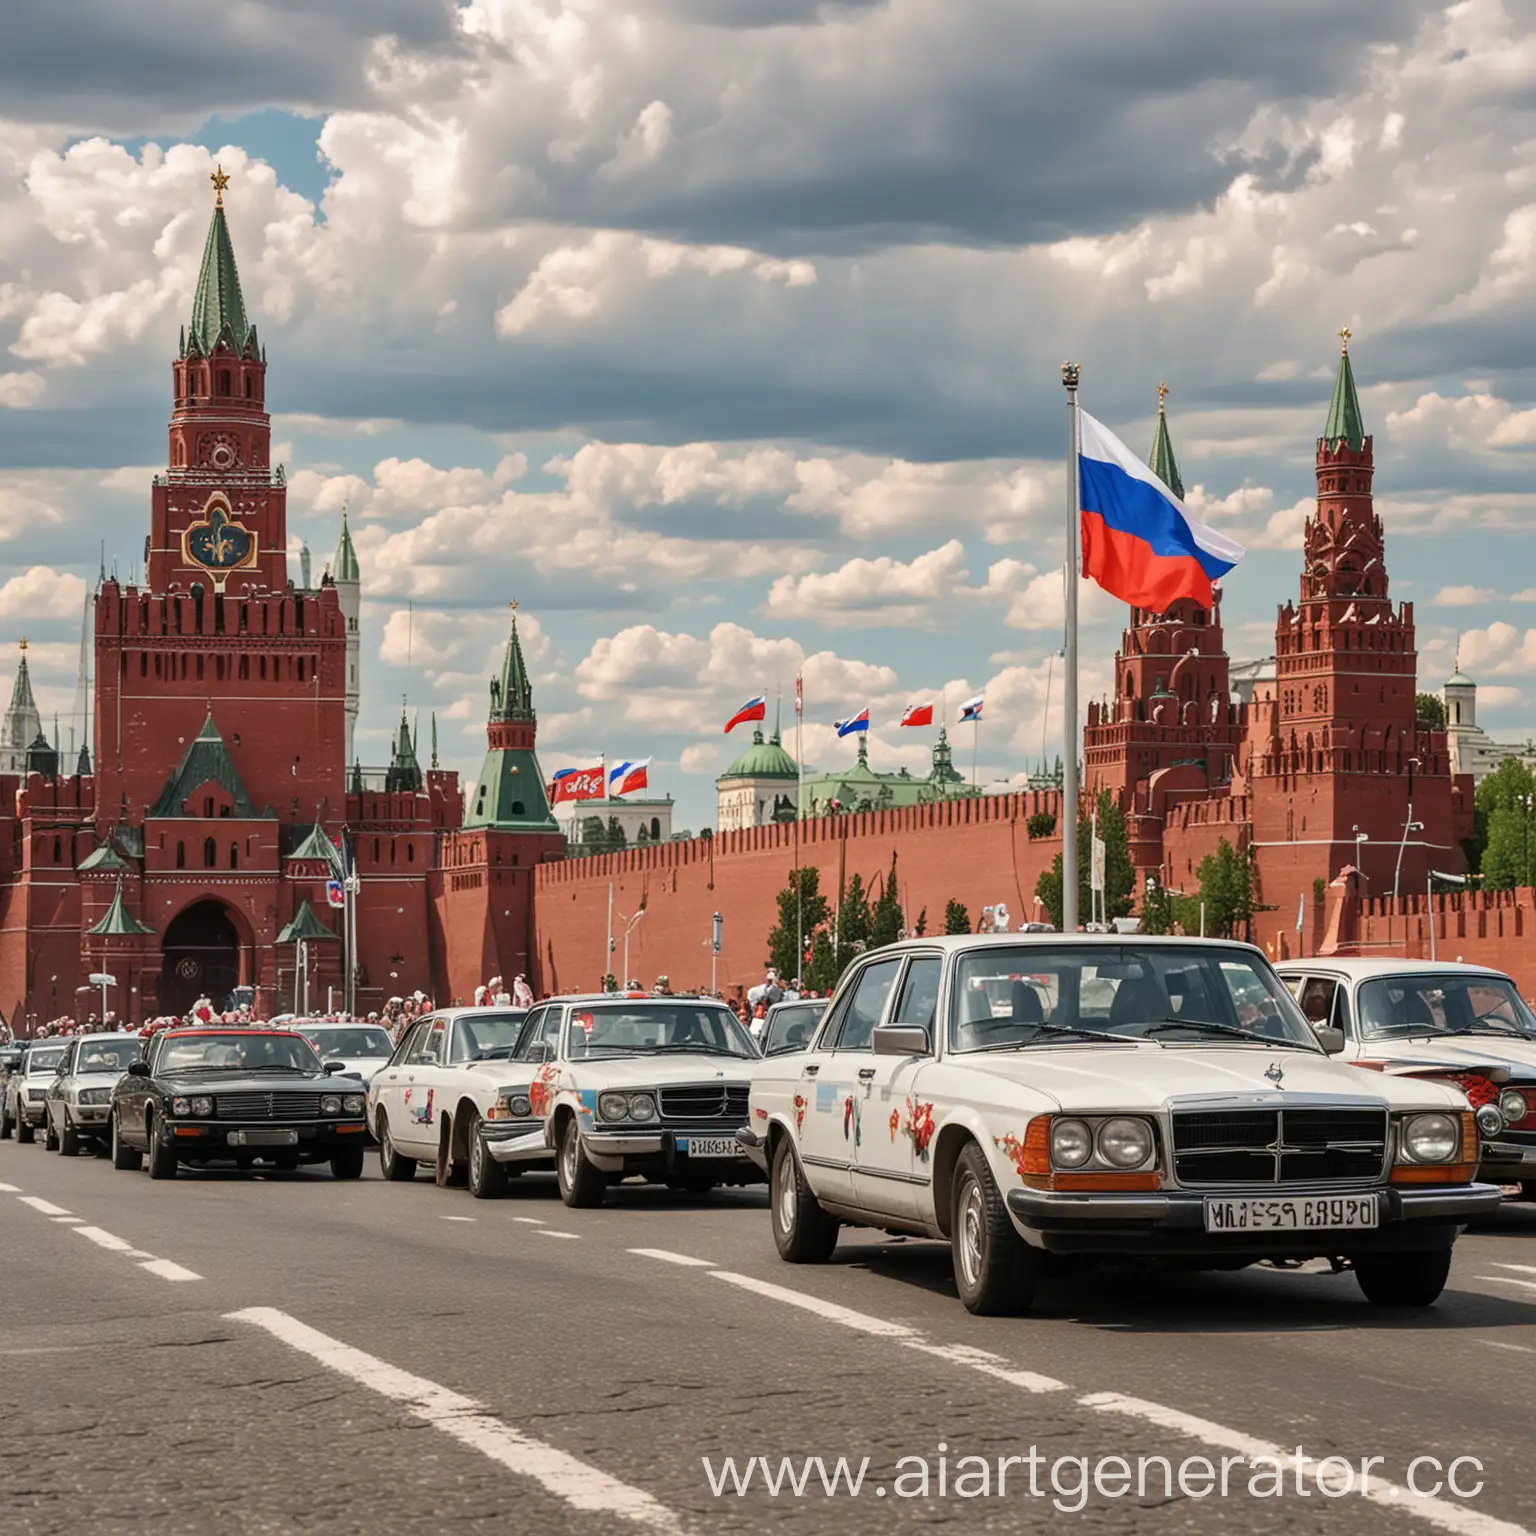 Celebrating-Russia-Day-Smiling-People-with-Russian-Flag-and-Cars-at-the-Kremlin